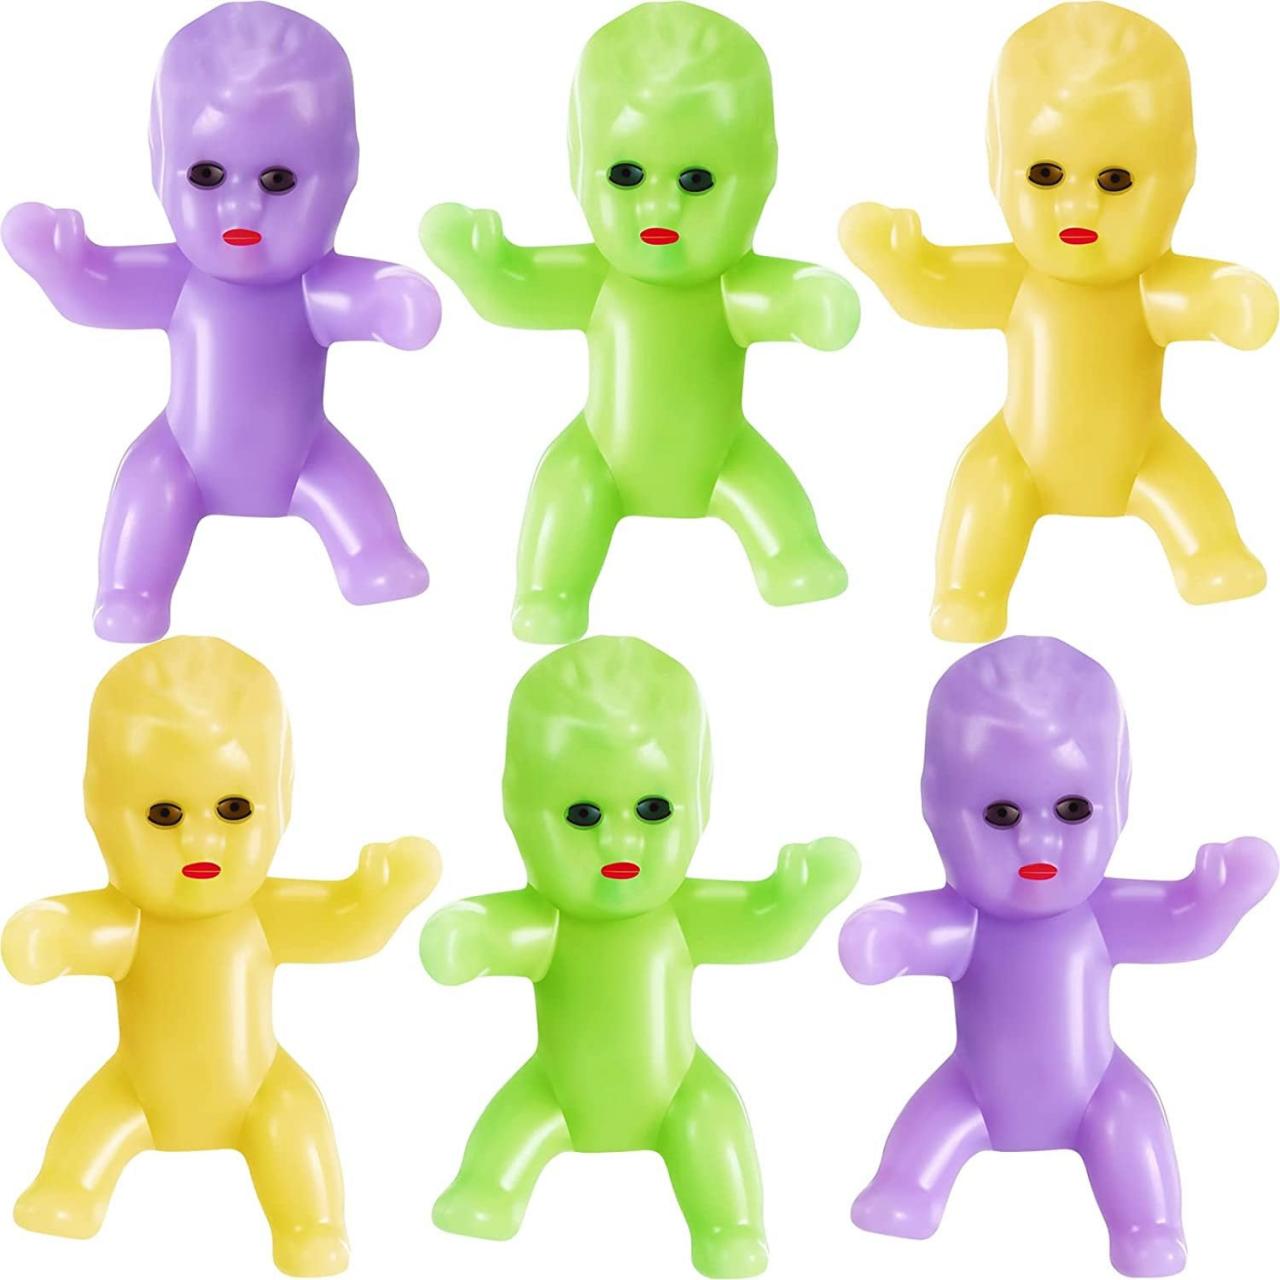 King Cake Babies In Purple Green And Yellow With Matte Finish. 1 Dozen Small King Cake Babies